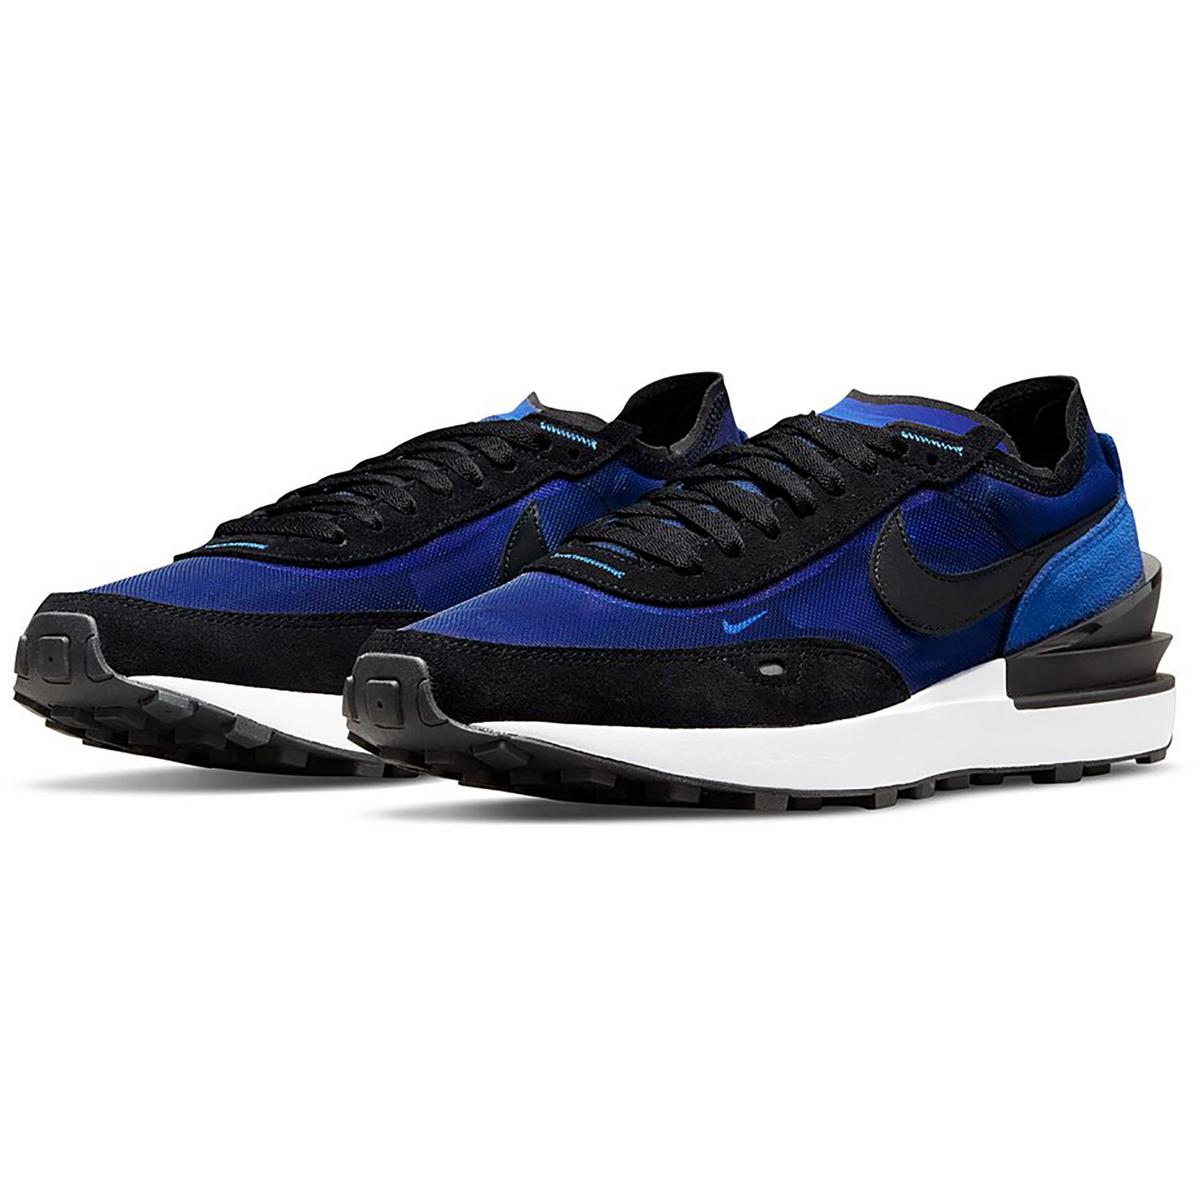 Nike Waffle One Mens Fitness Workout Running Shoes